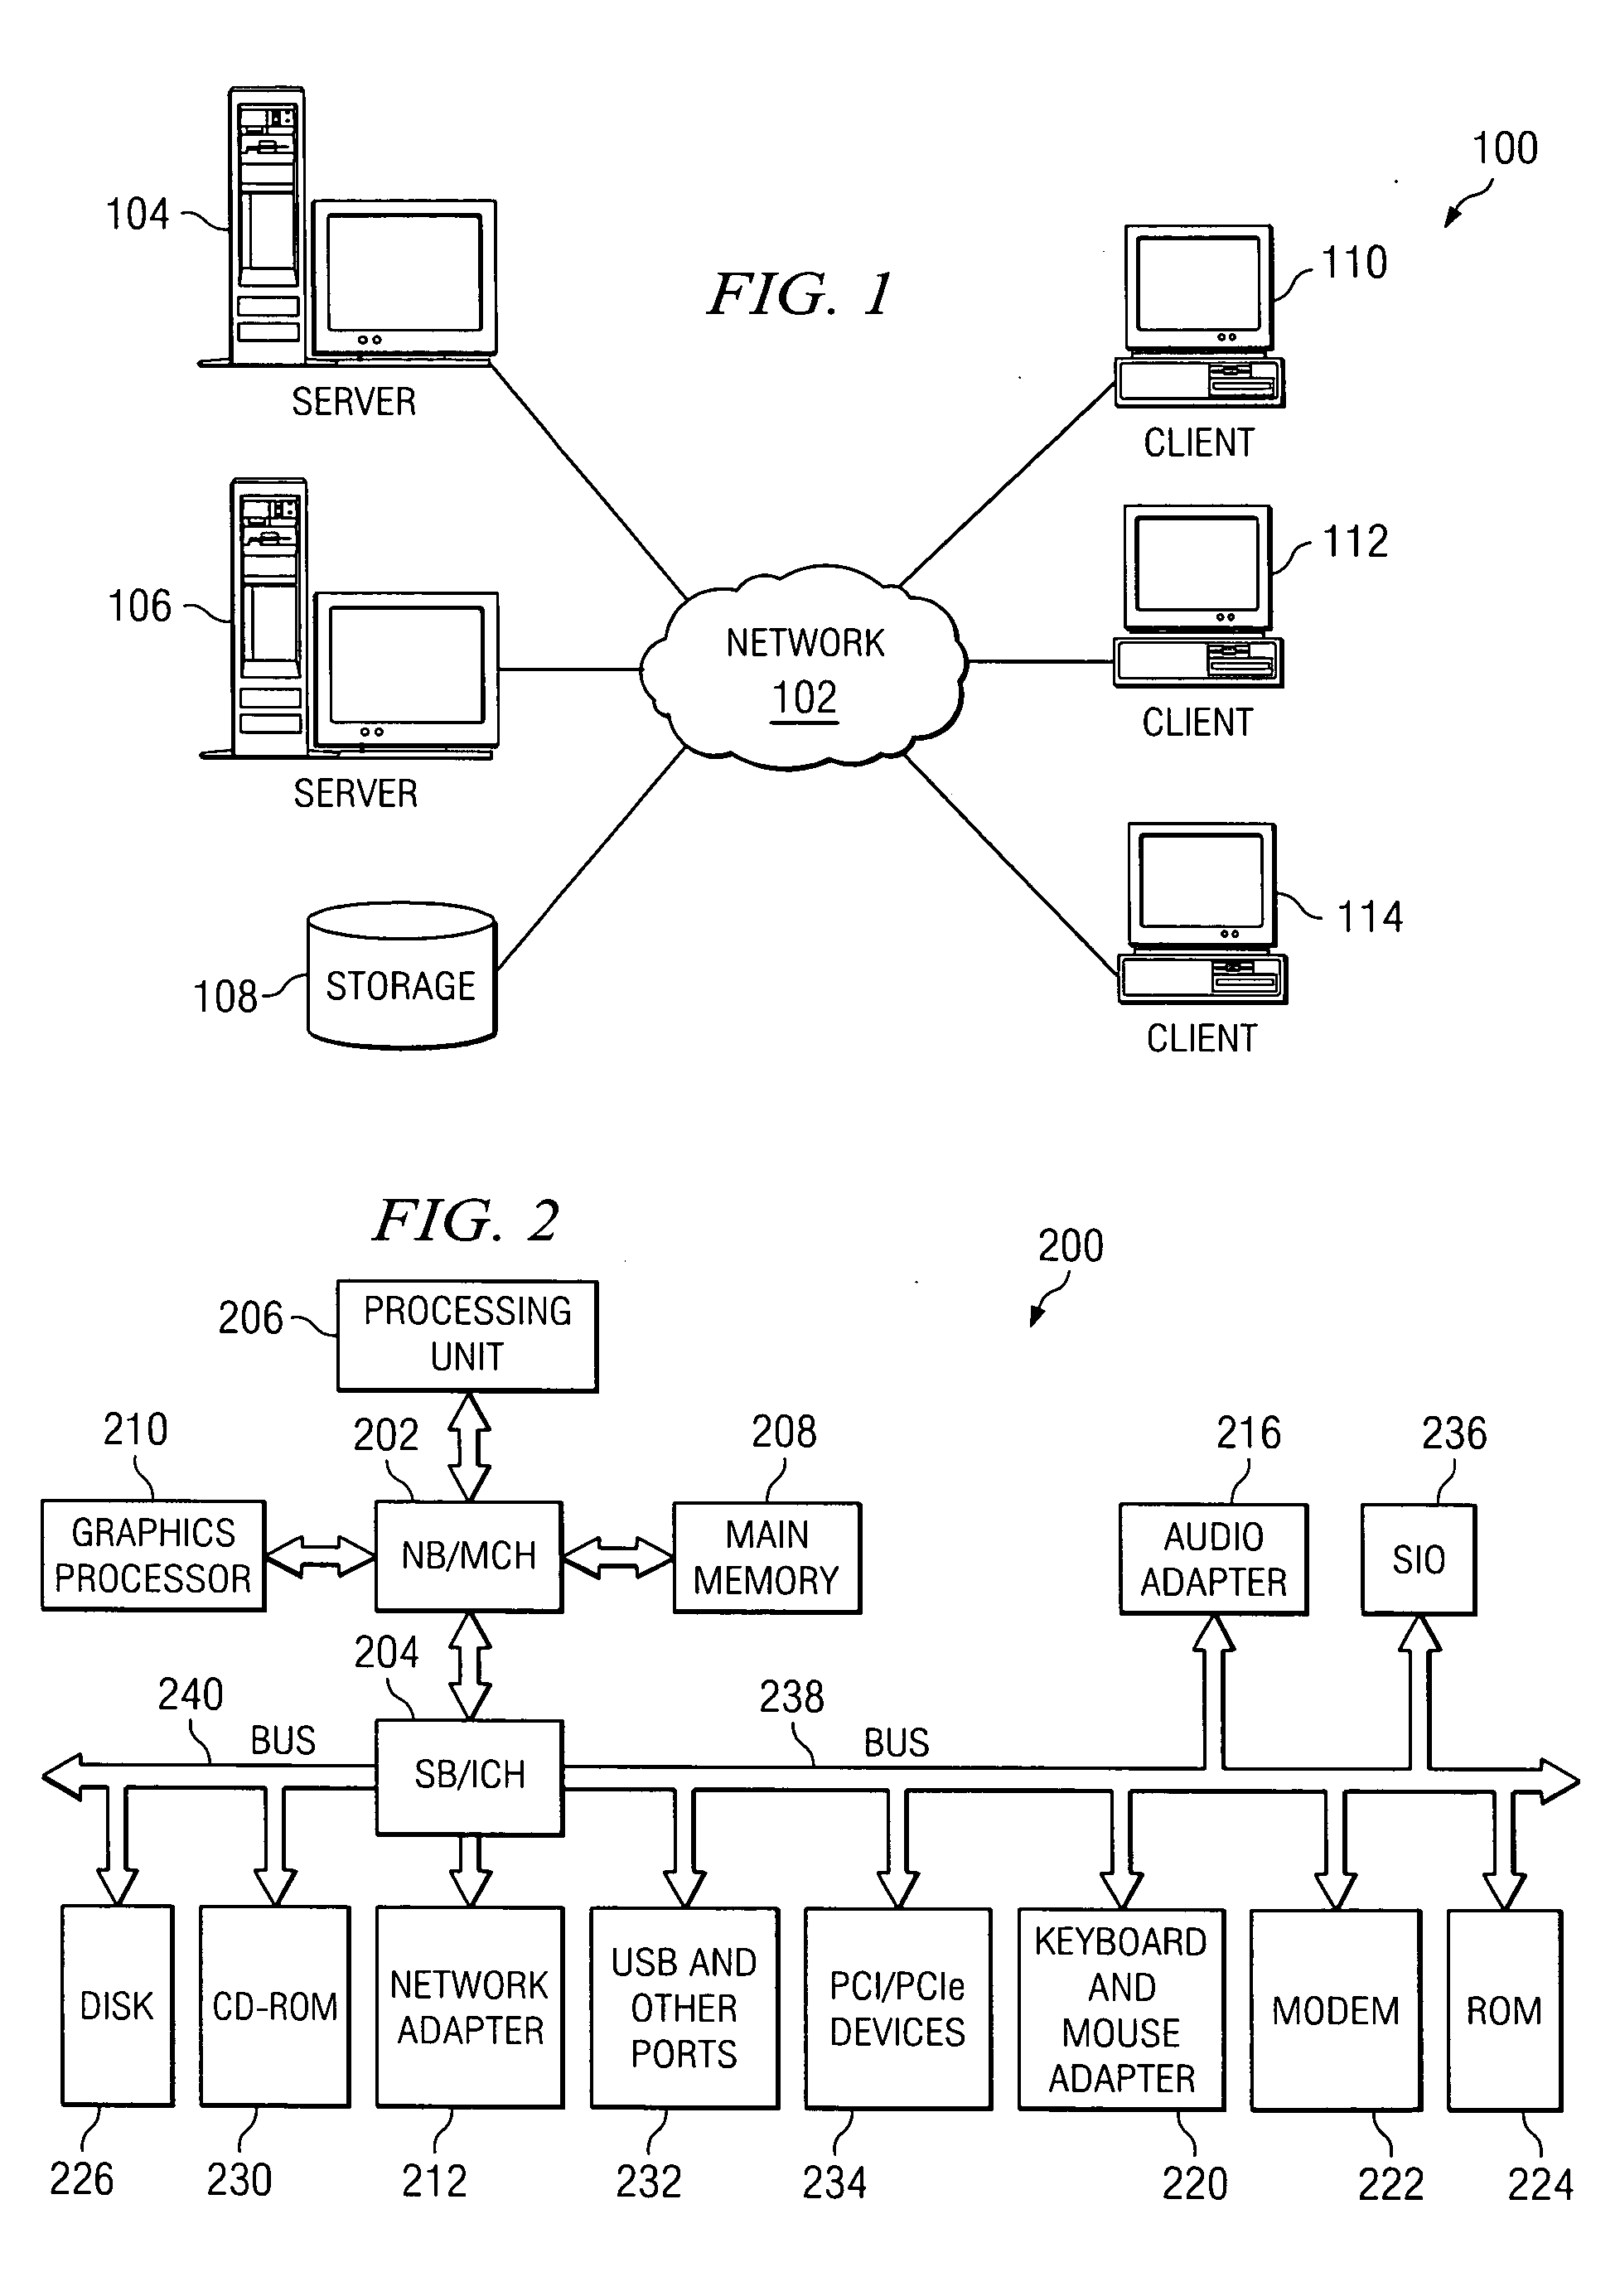 Generation of hardware thermal profiles for a set of processors